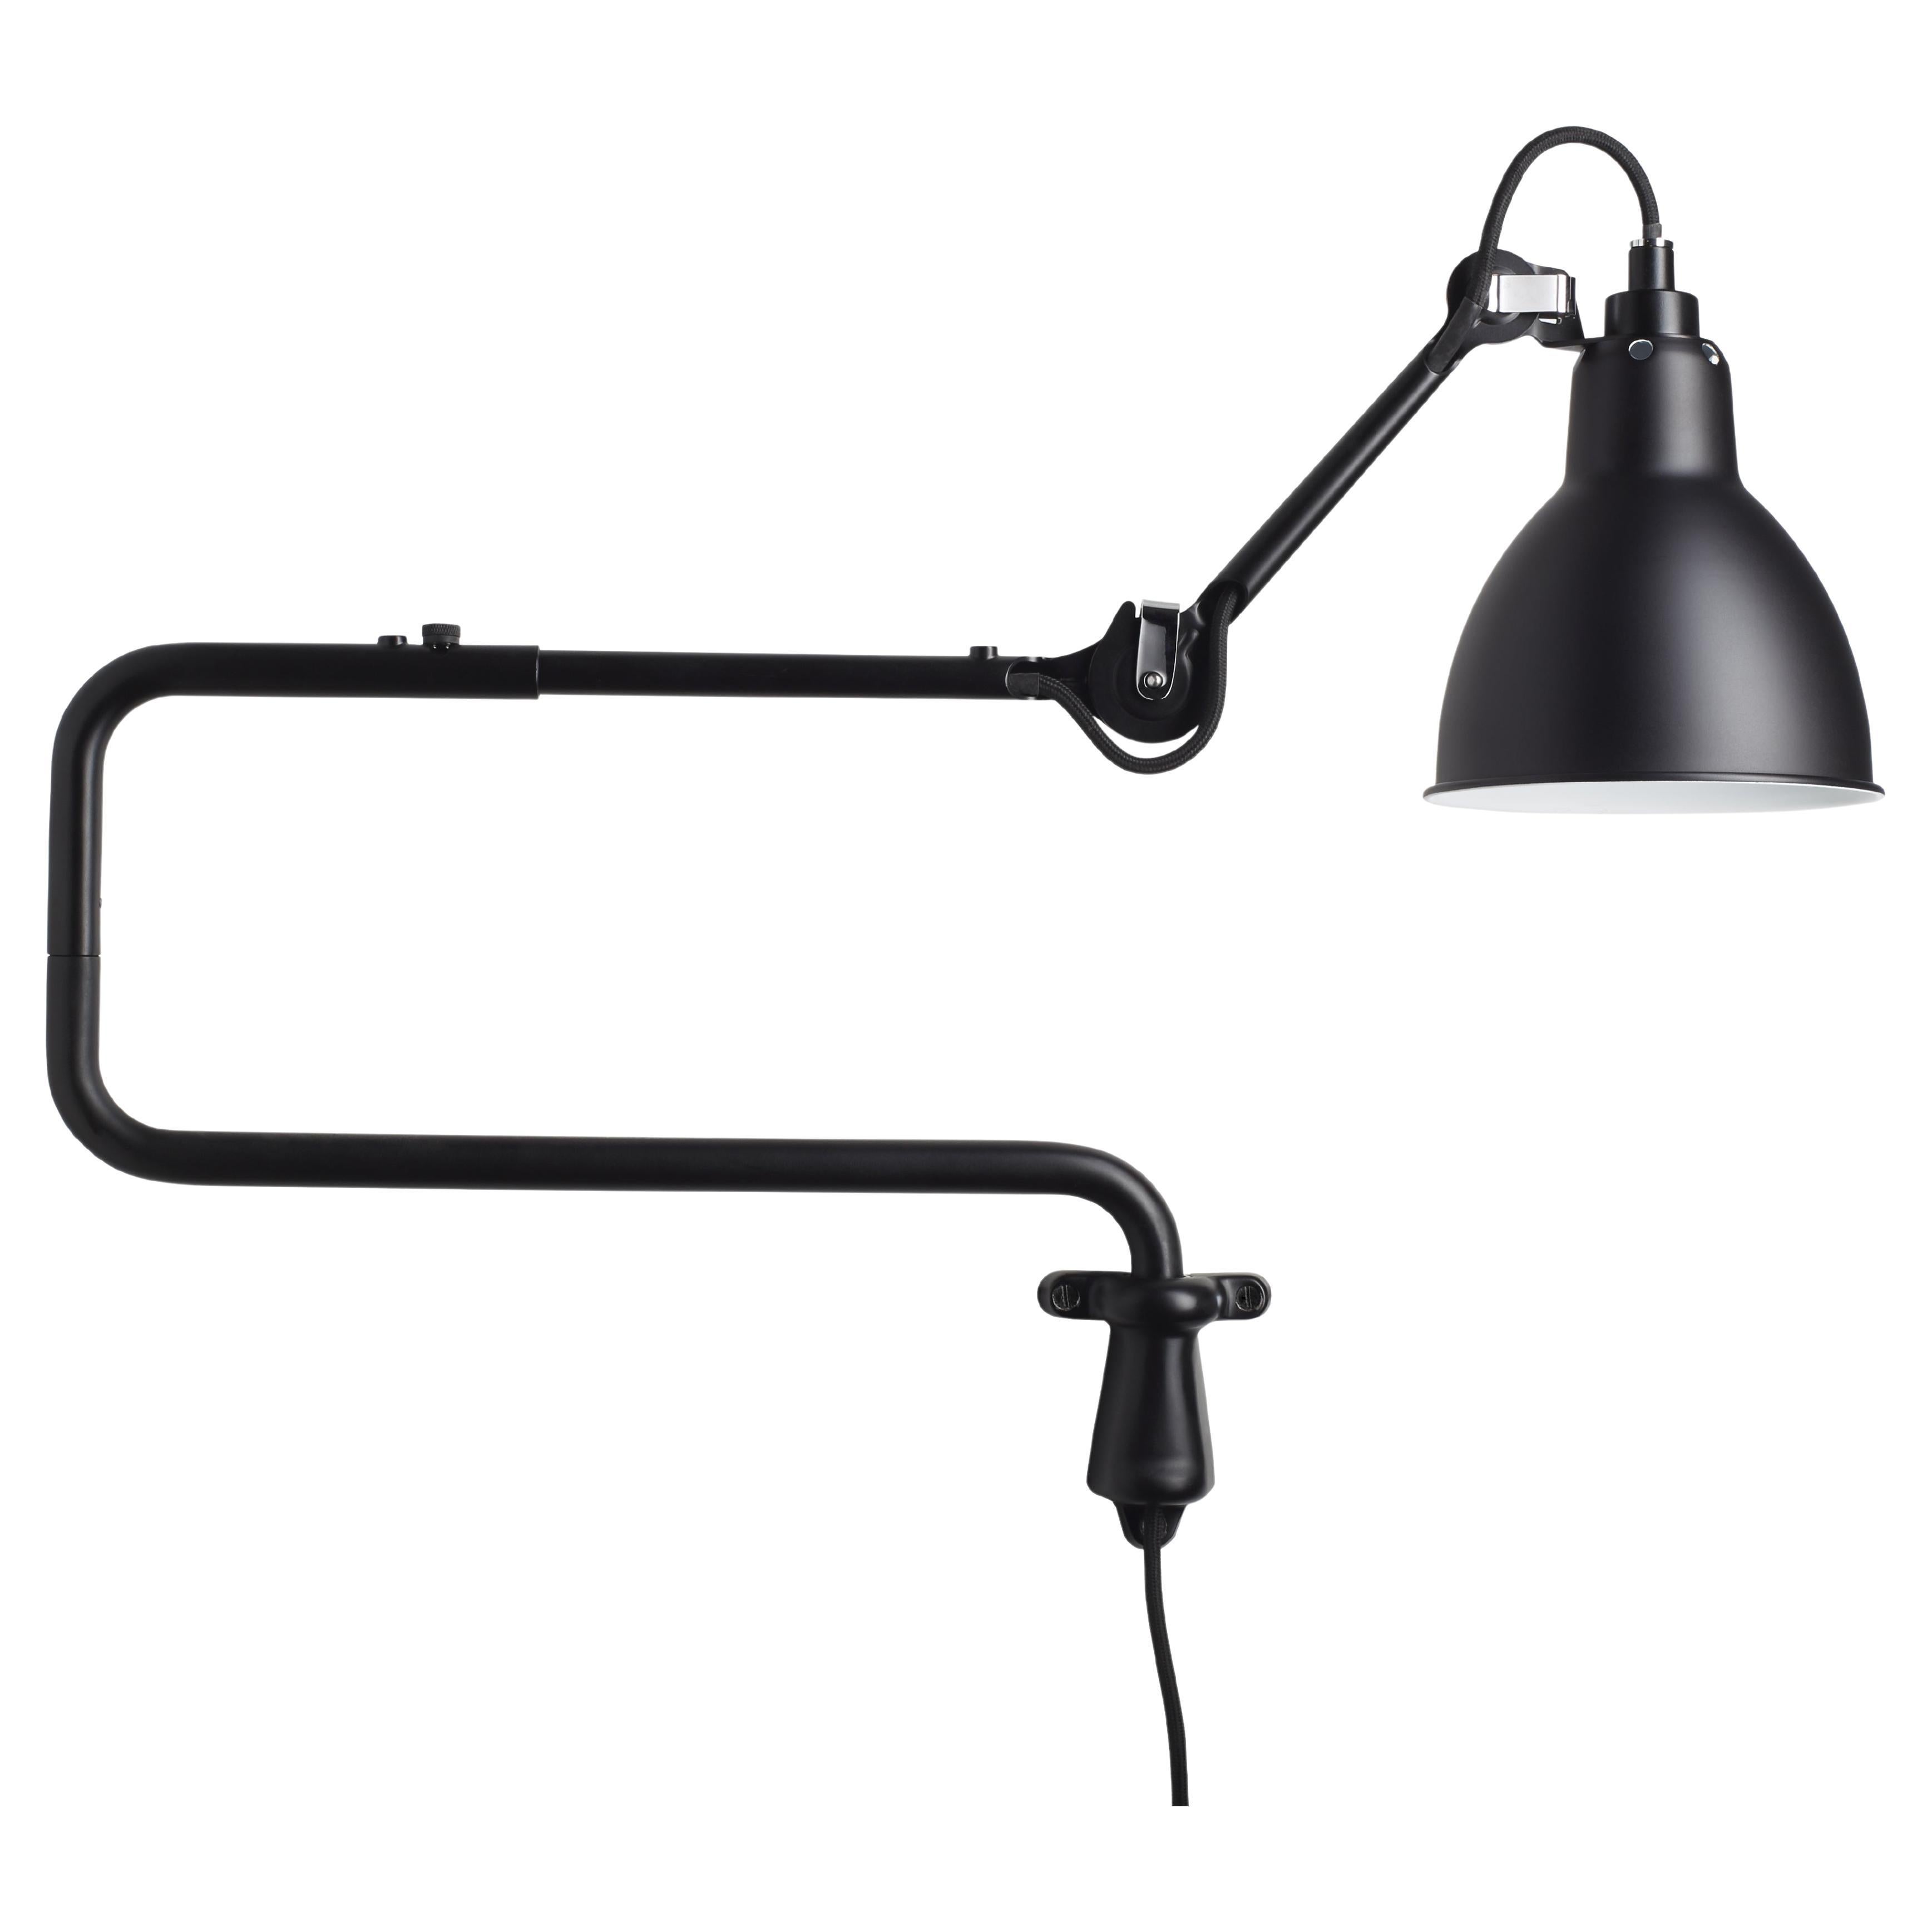 DCW Editions La Lampe Gras N°303 Wall Lamp in Black Arm and Black Shade